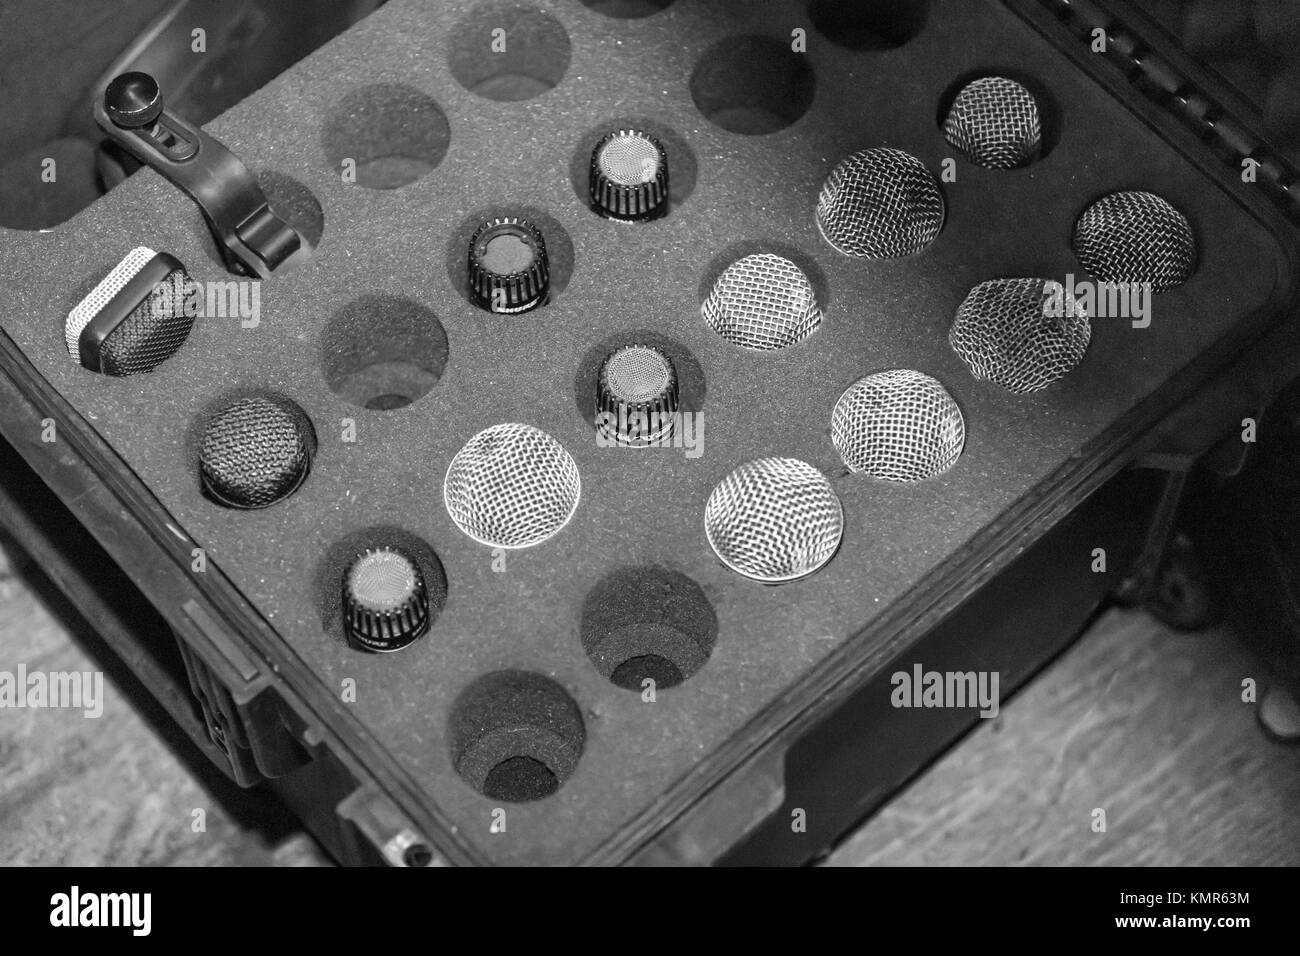 box filled with various microphones at a music venue in amagansett, ny Stock Photo